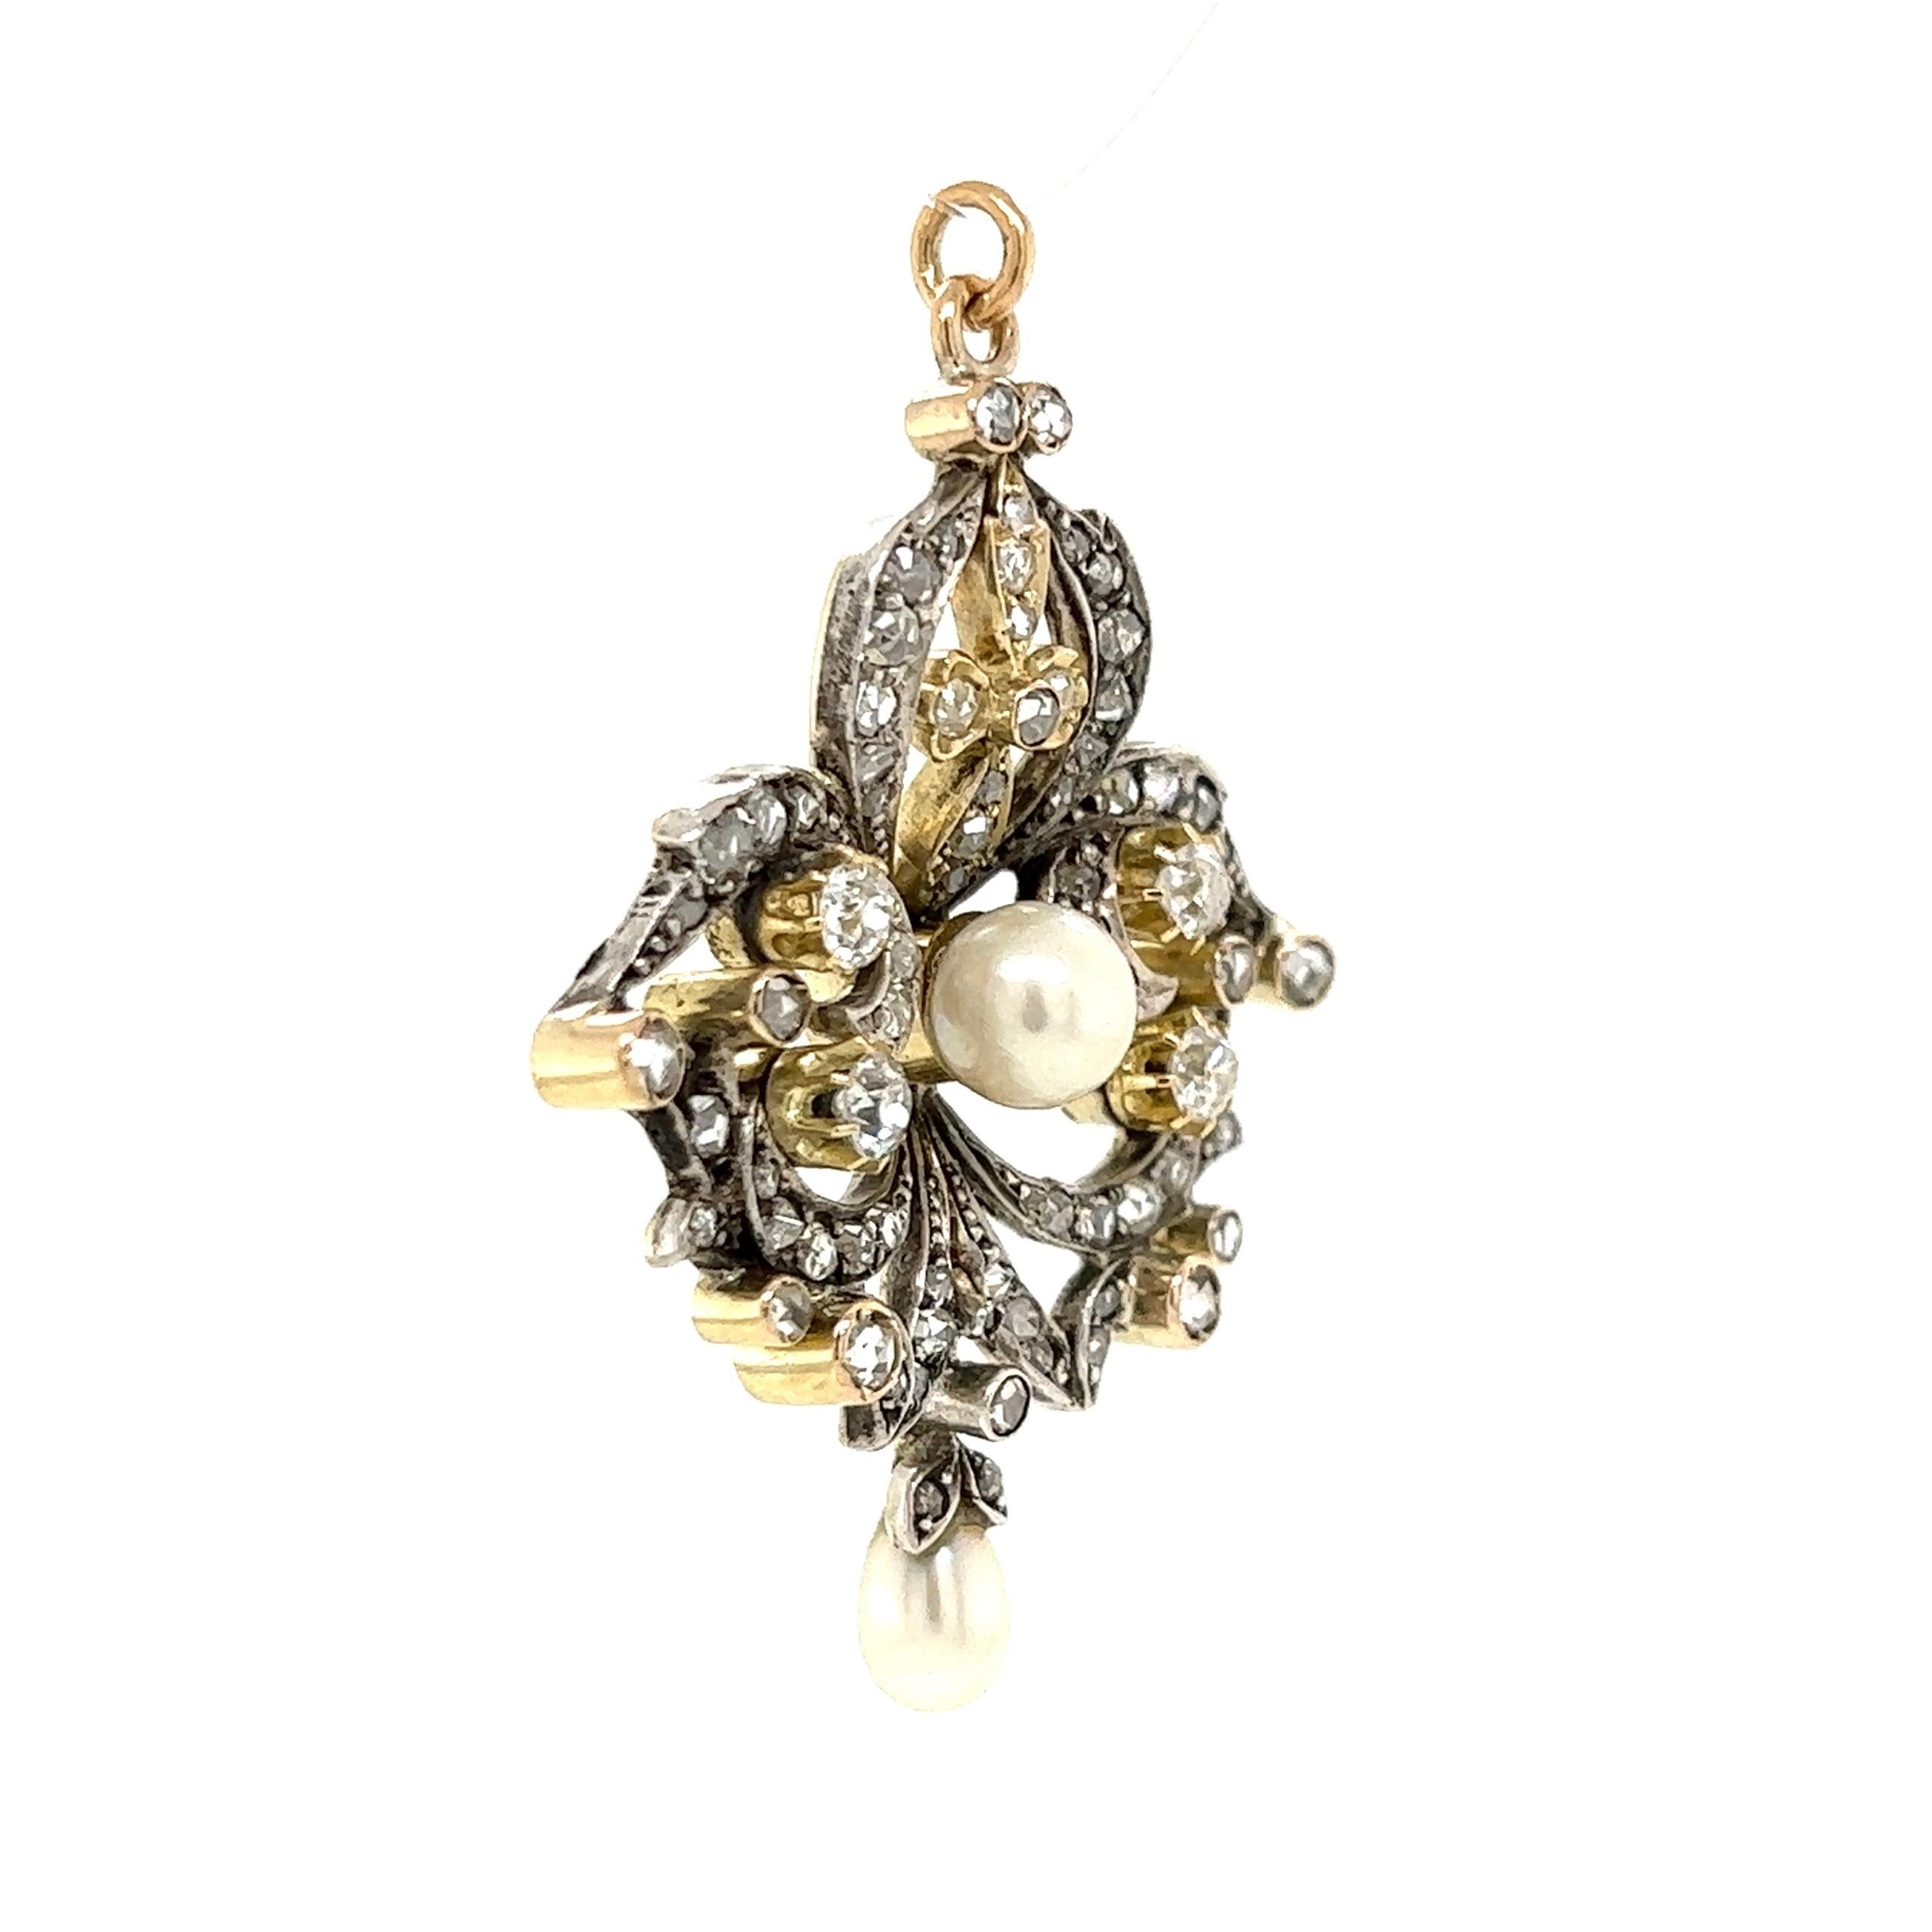 Simply Beautiful! Elegant and finely detailed Antique Victorian Diamond and Pearl Pendant Necklace. Hand set with 67 Rose-Cut Diamonds approx. 1.34tcw and 4 Old Mine-Cut Diamonds approx. 0.50tcw. Approx. total weight of diamonds. 1.84tcw.